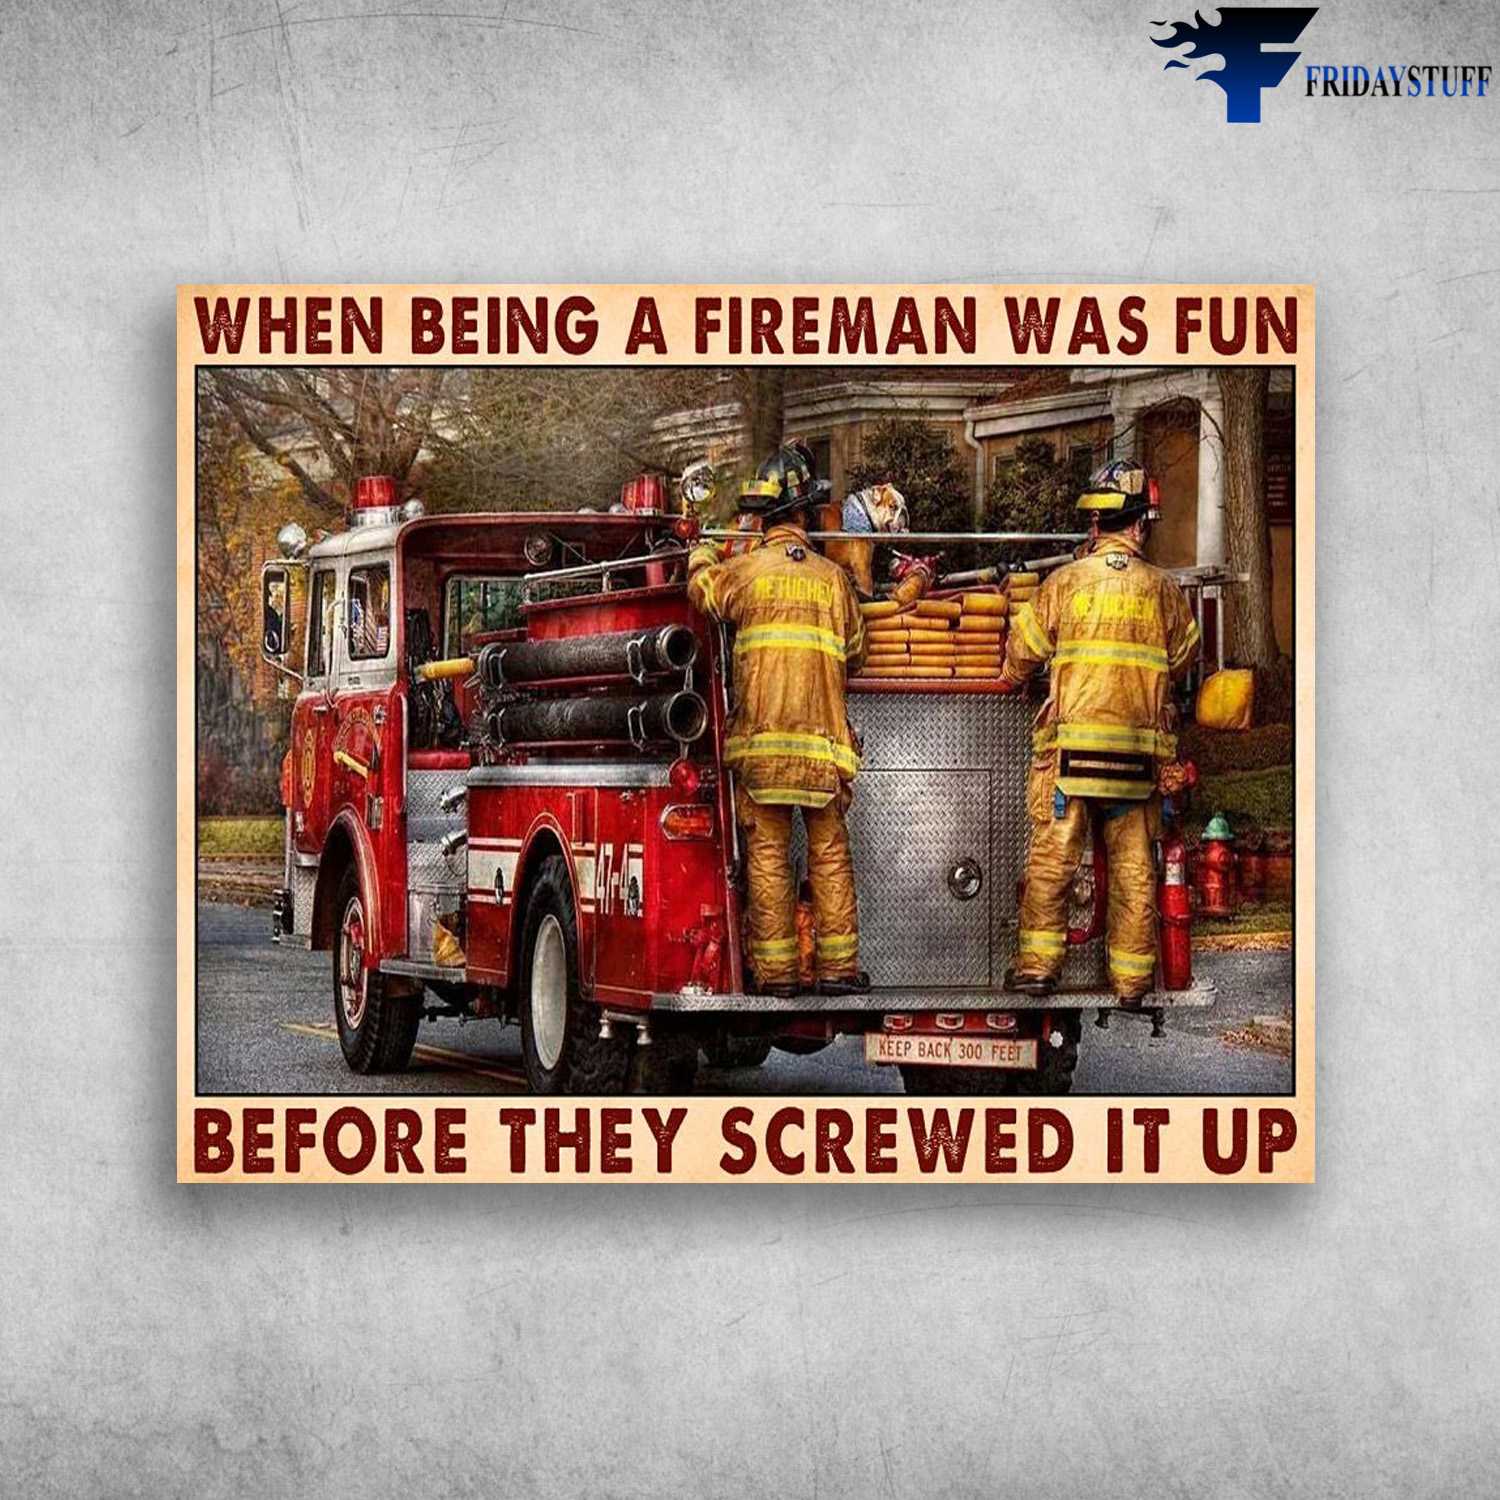 Firefighter Poster, When Being A Fireman Was Fun, Before The Screwed In Up